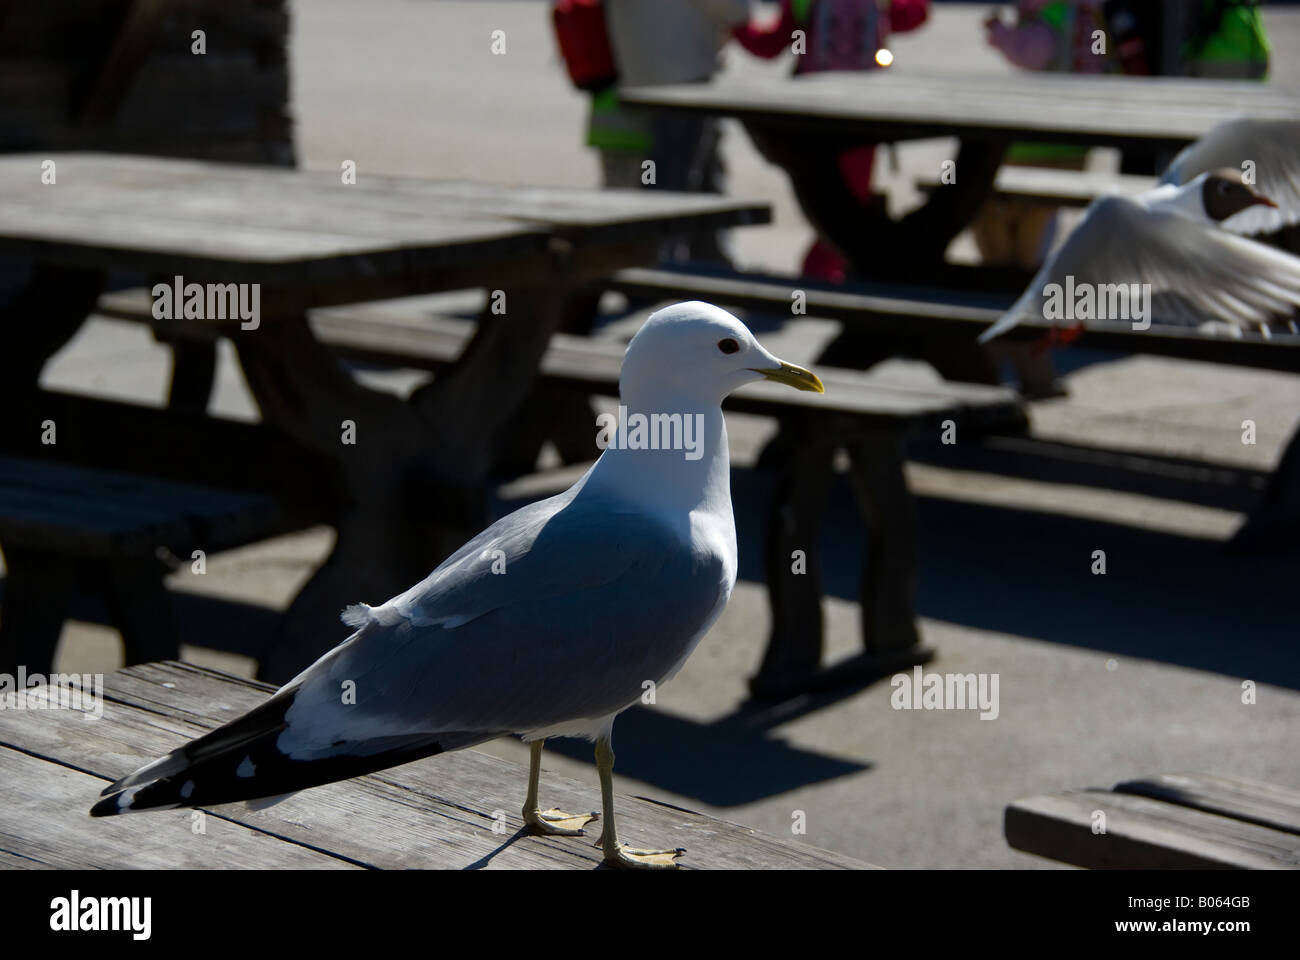 A herring gull sitting on a cafe table Stock Photo